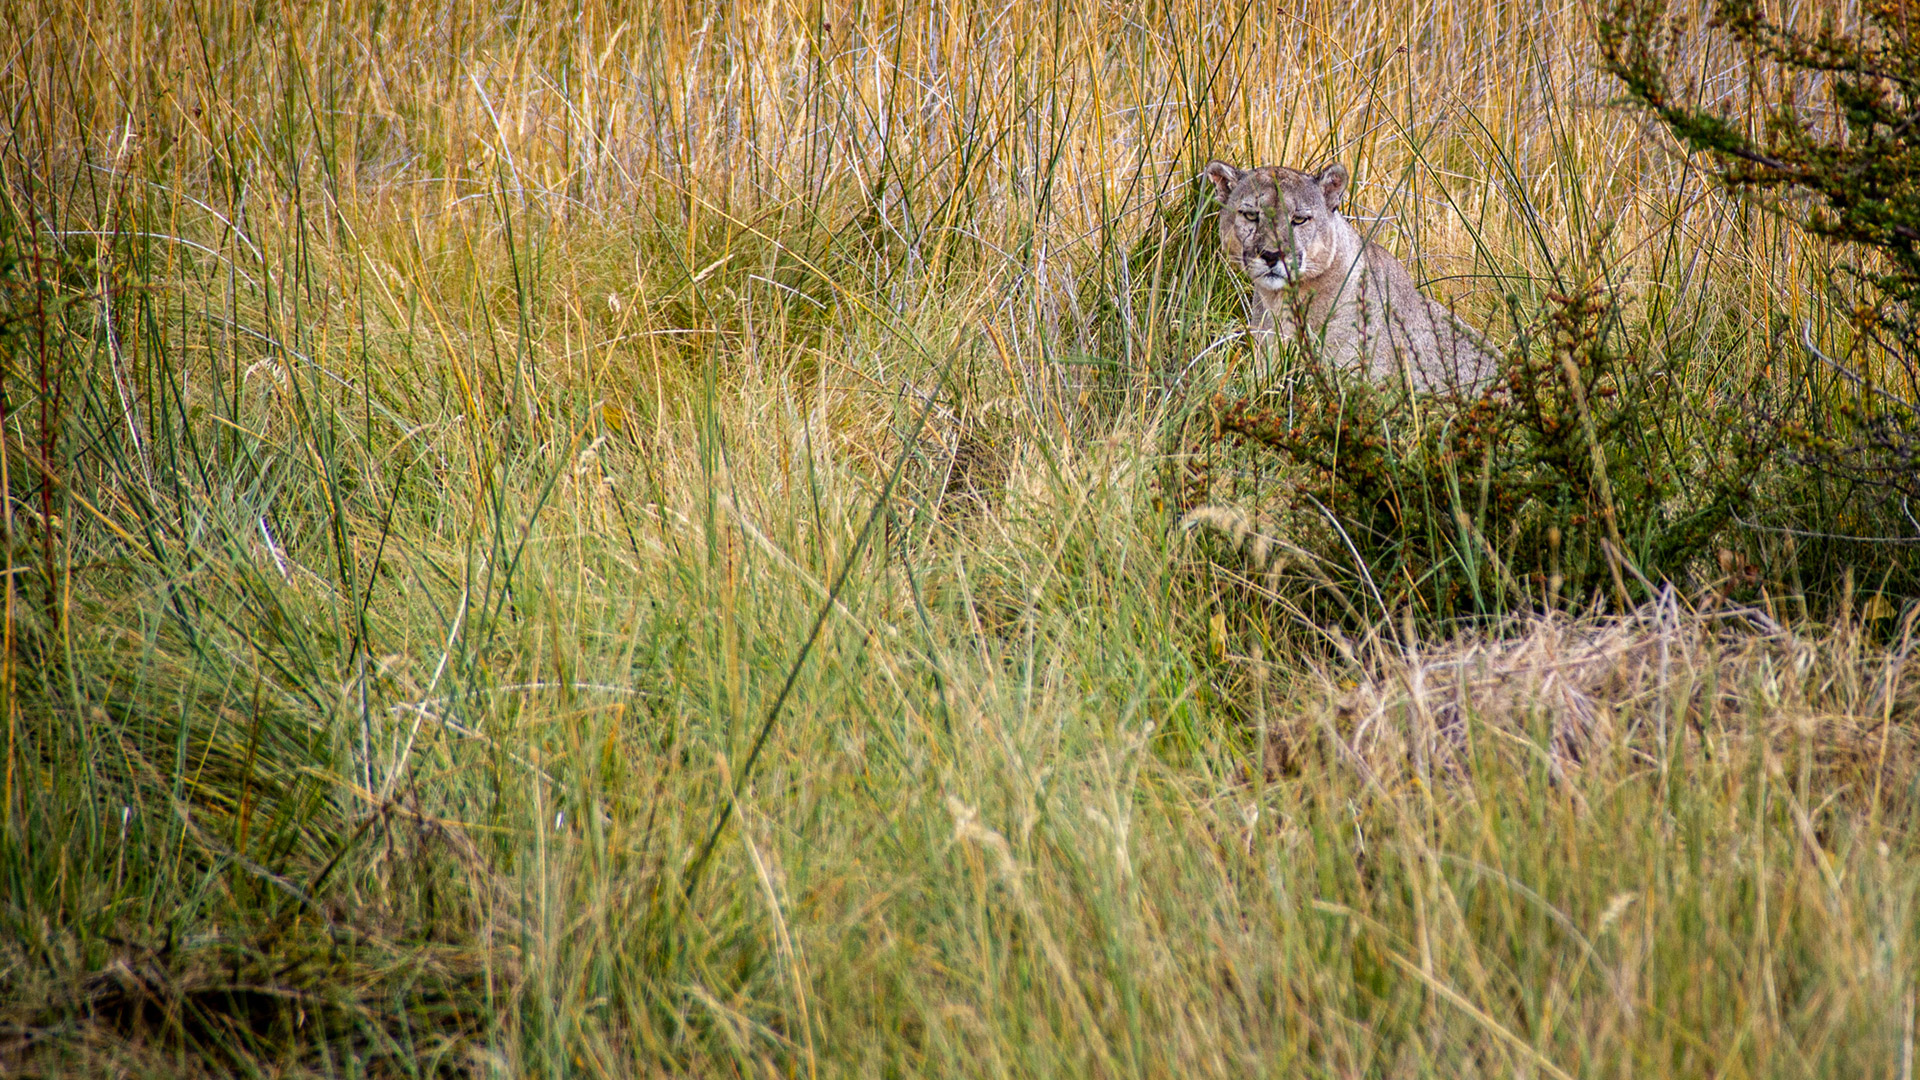 Puma in tall grasses in Patagonia National Park, Chile